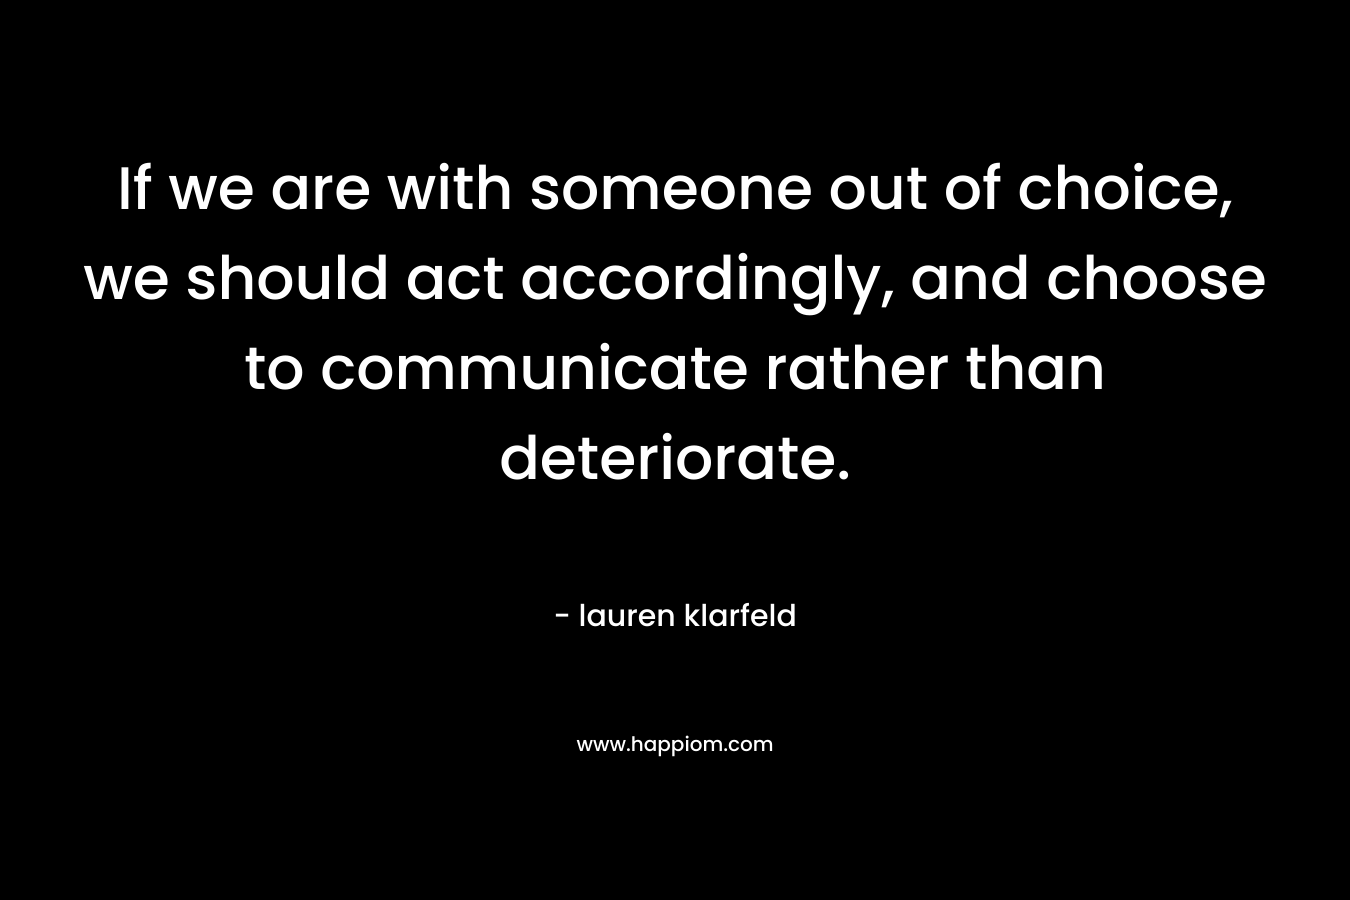 If we are with someone out of choice, we should act accordingly, and choose to communicate rather than deteriorate. – lauren klarfeld